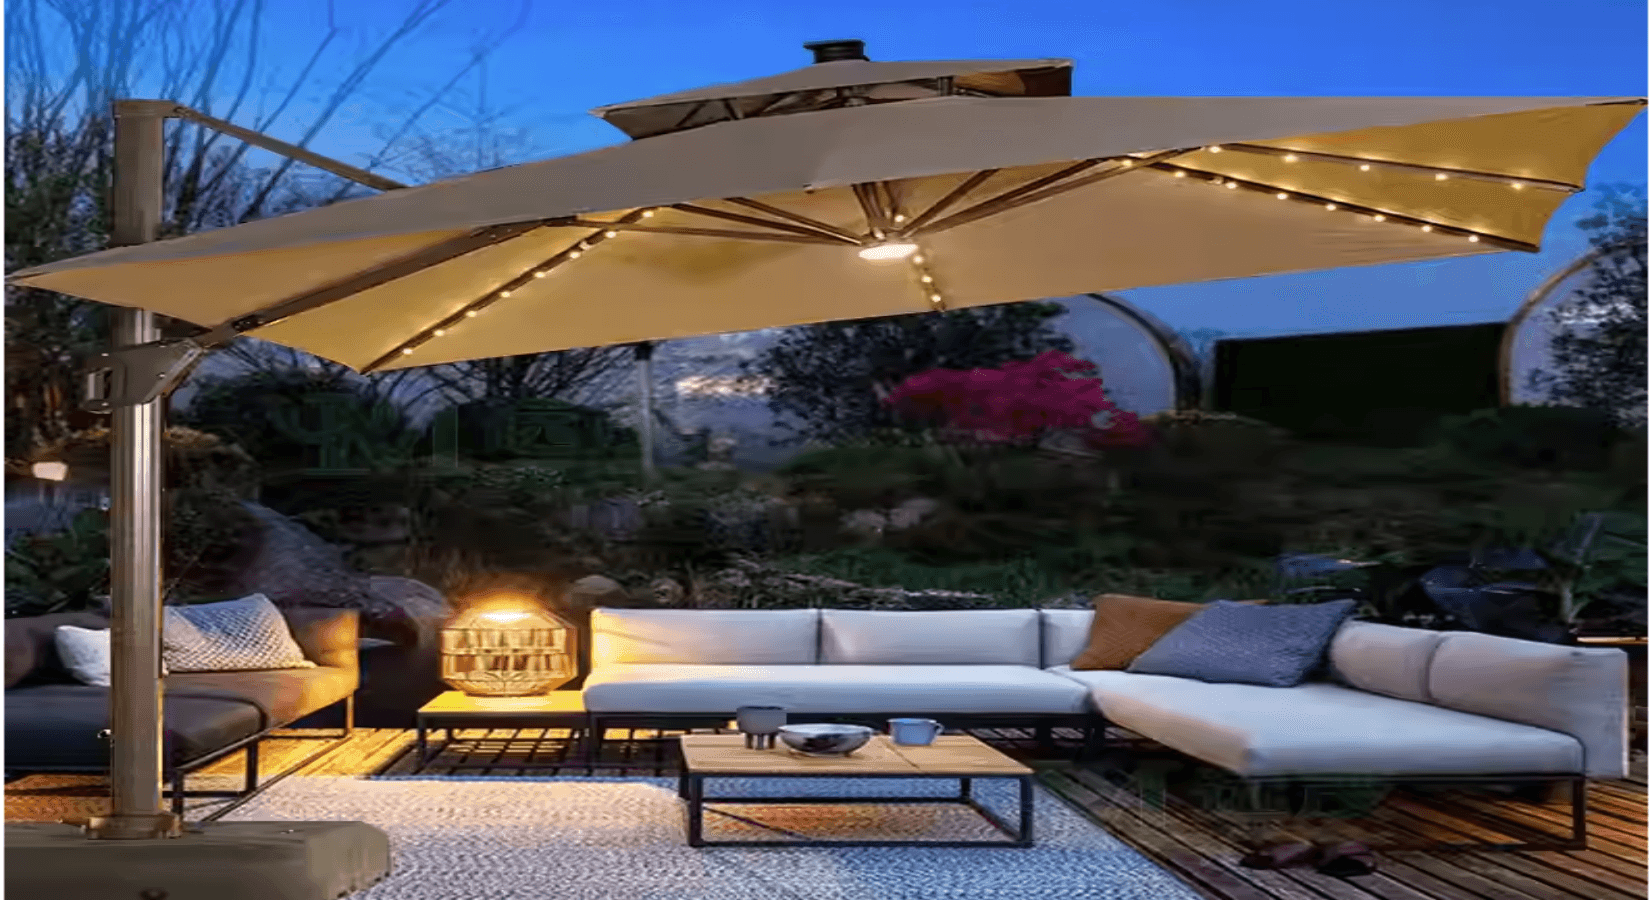 Patio umbrellas: adding comfort and beauty to your outdoor space - Parasol